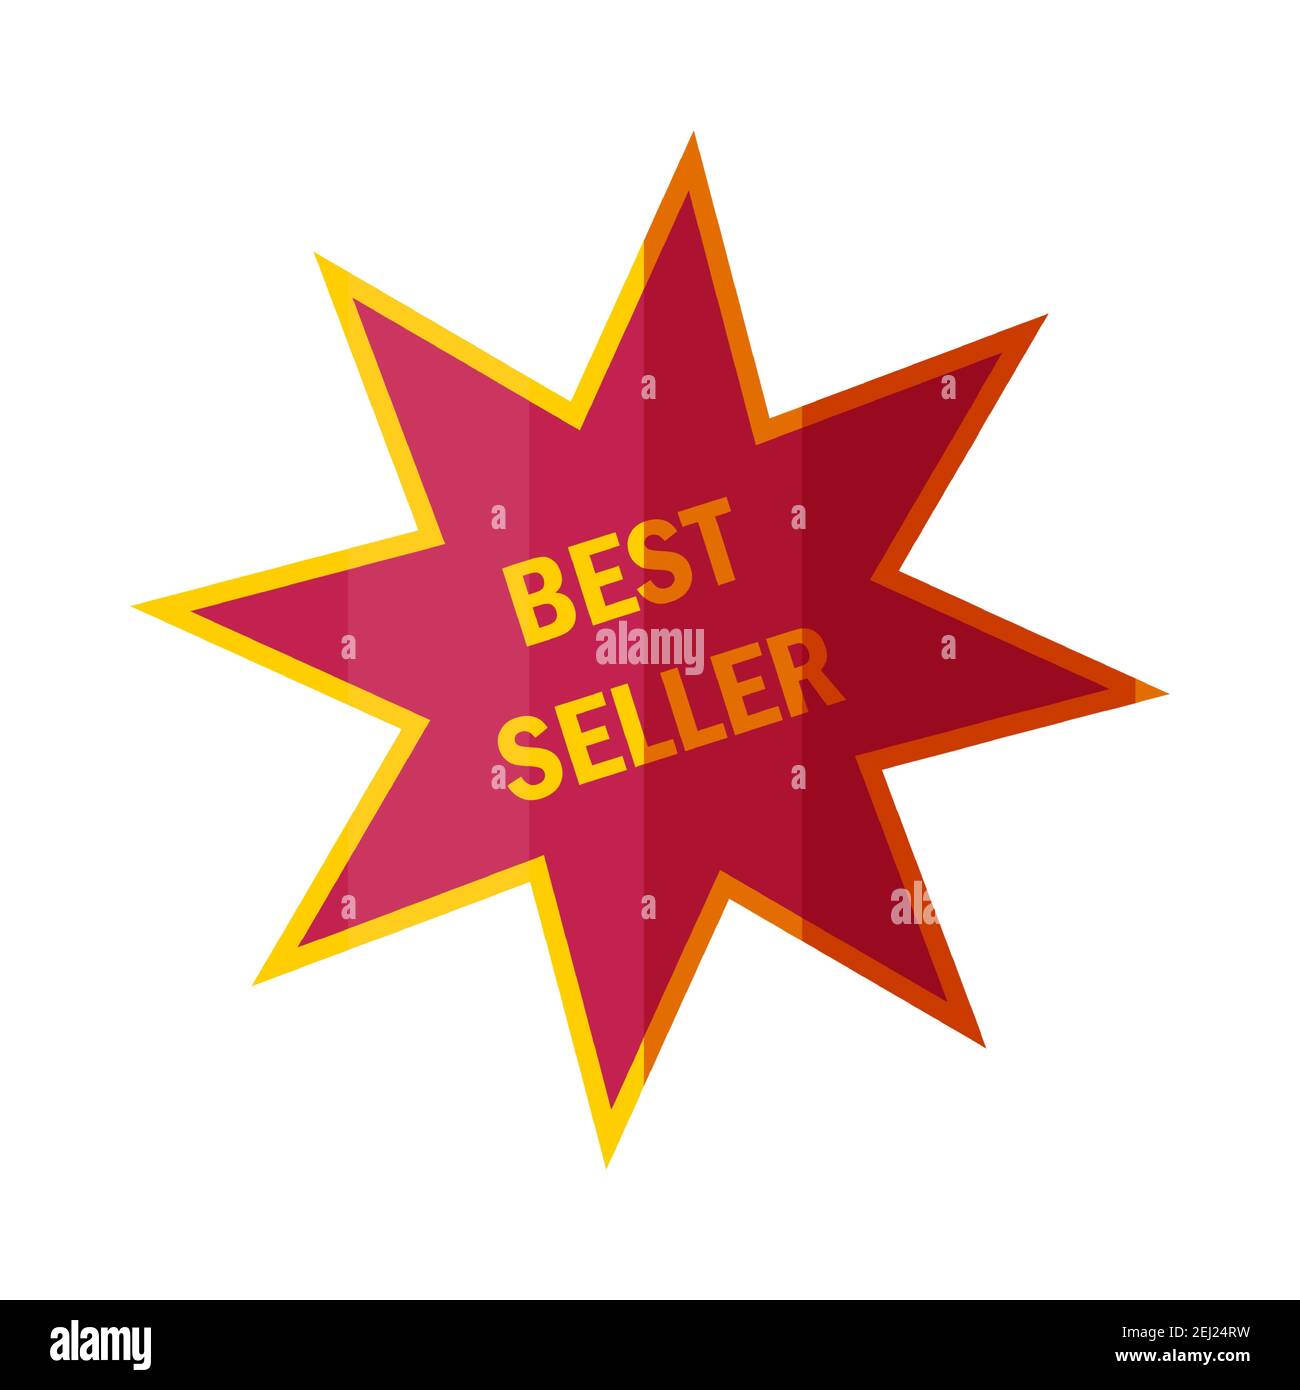 Best seller sticker or badge. Shiny label for top book sellers in